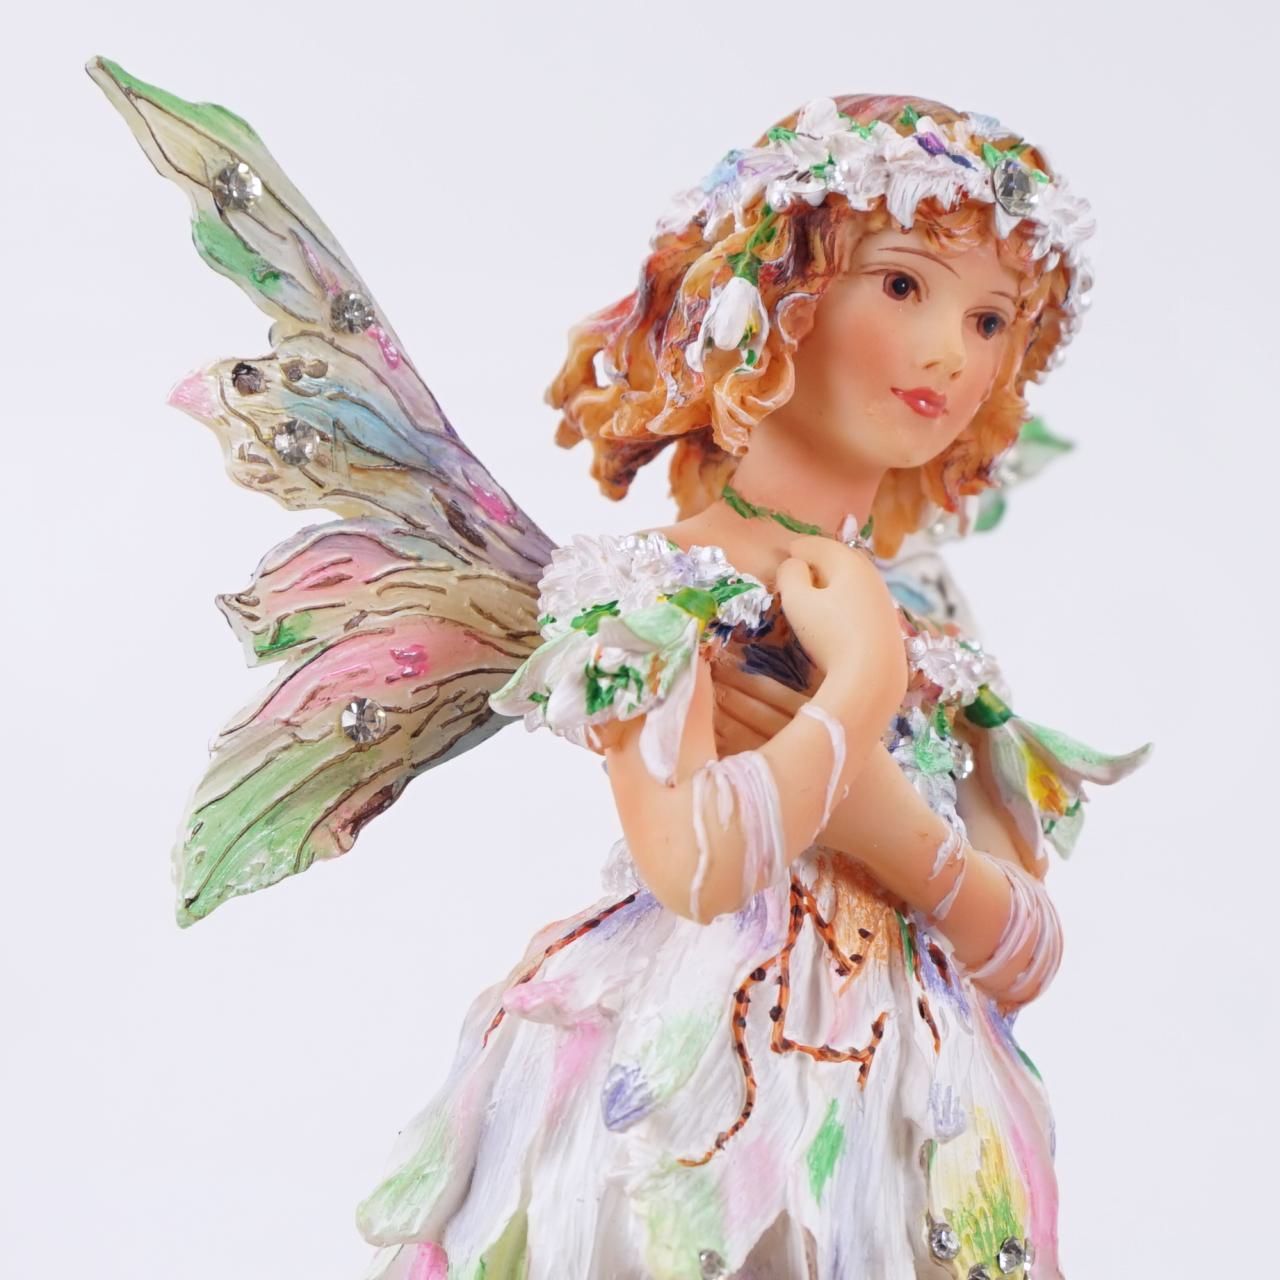 Crisalis Collection★ Early Snowdrop Faerie (1-1125) 20% OFF